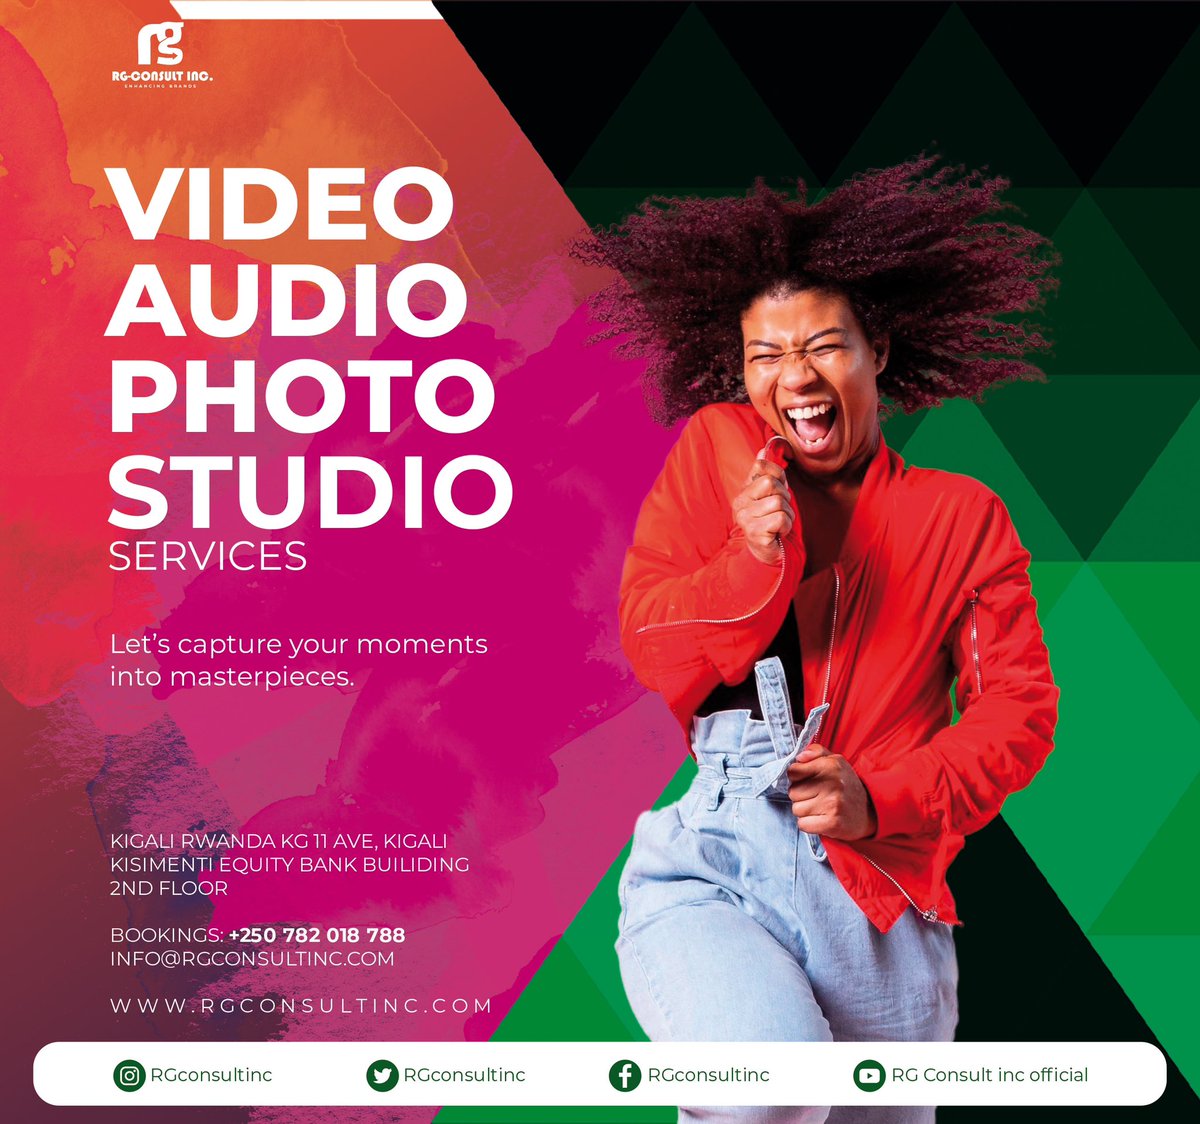 Whether it’s #AudioProduction, #VideoProduction, or #PhotoSessions, @Rgconsultinc has got you covered. Book your #Studio time now! 🎬📸 
For Bookings, call: 0782018788 or email: Info@rgconsultinc.com